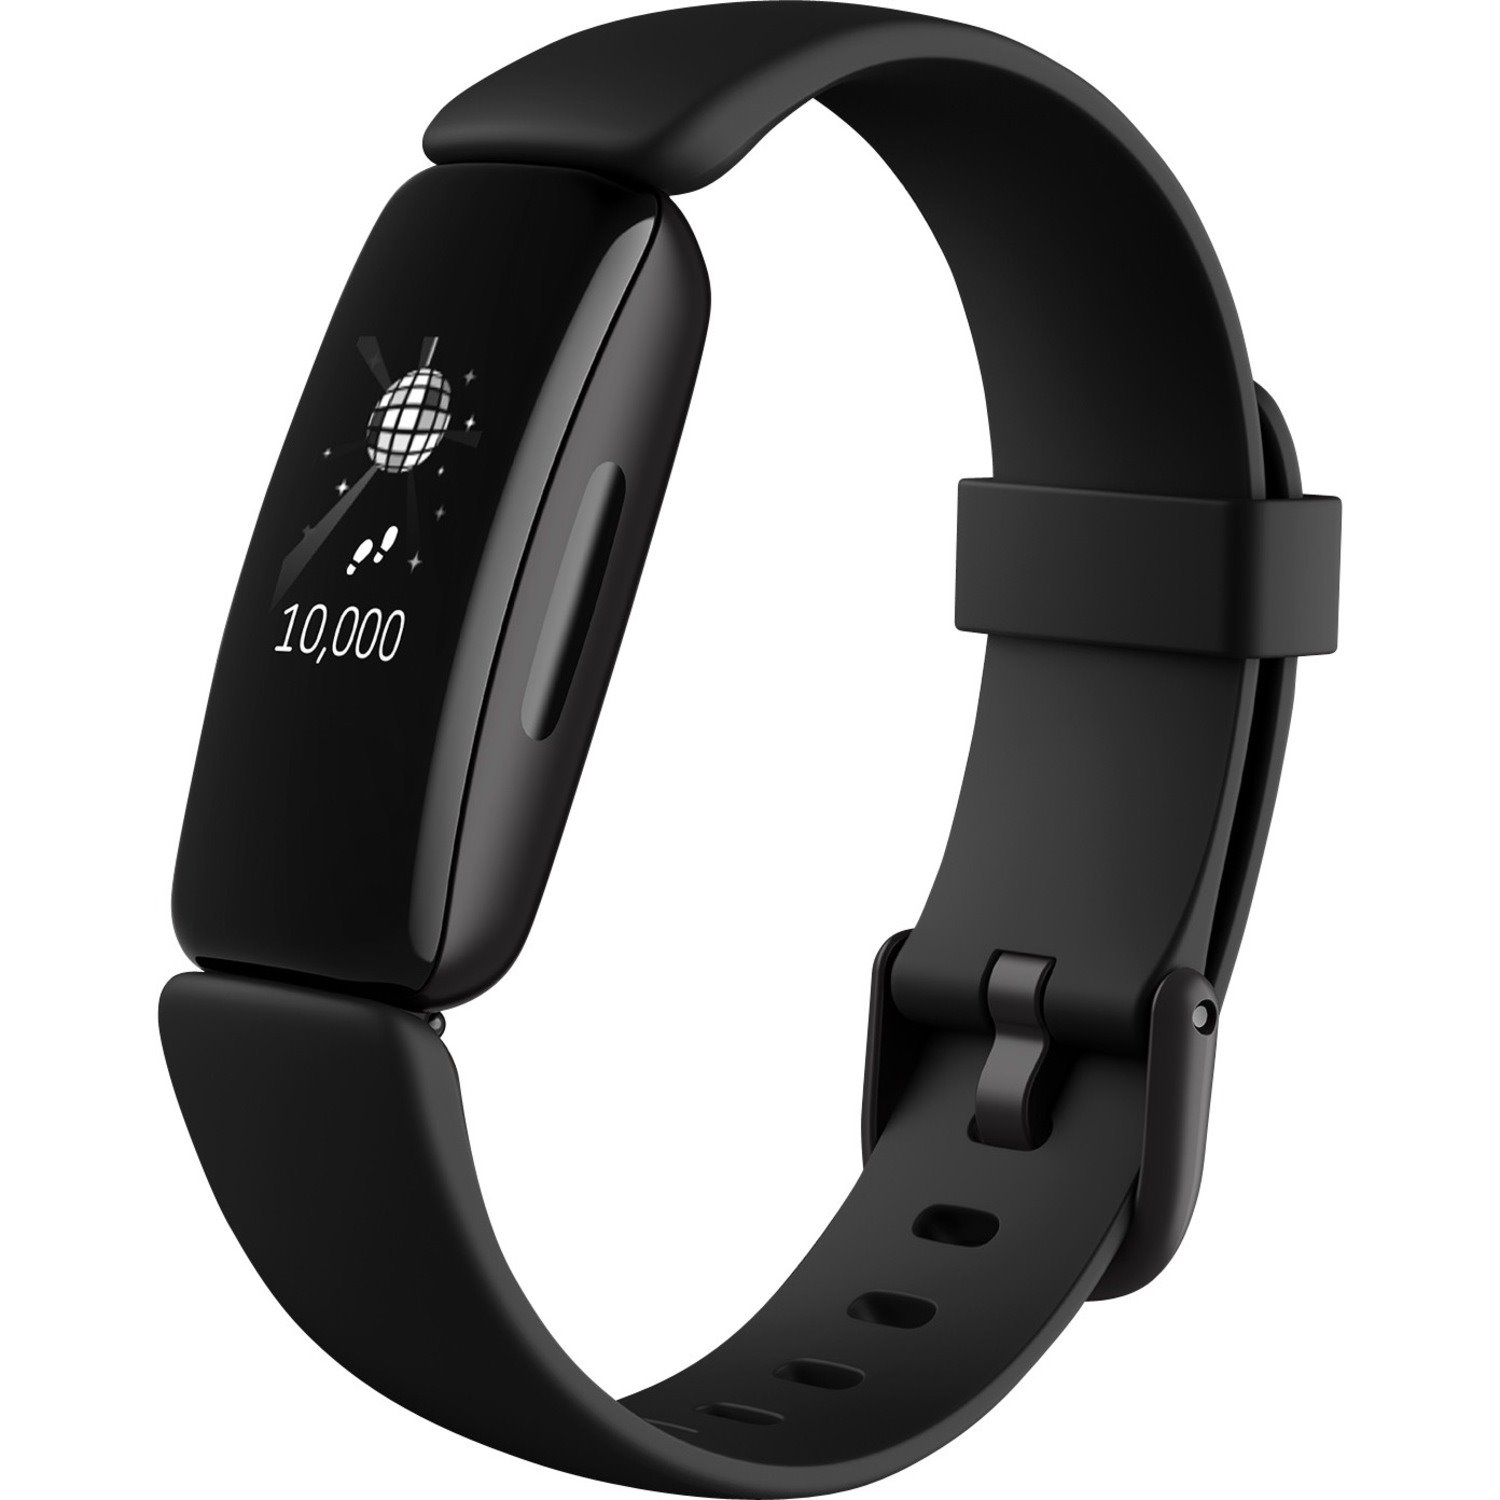 Fitbit Inspire 2 Smart Band - Black Body Color - Plastic Body Material - Silicone Band Material